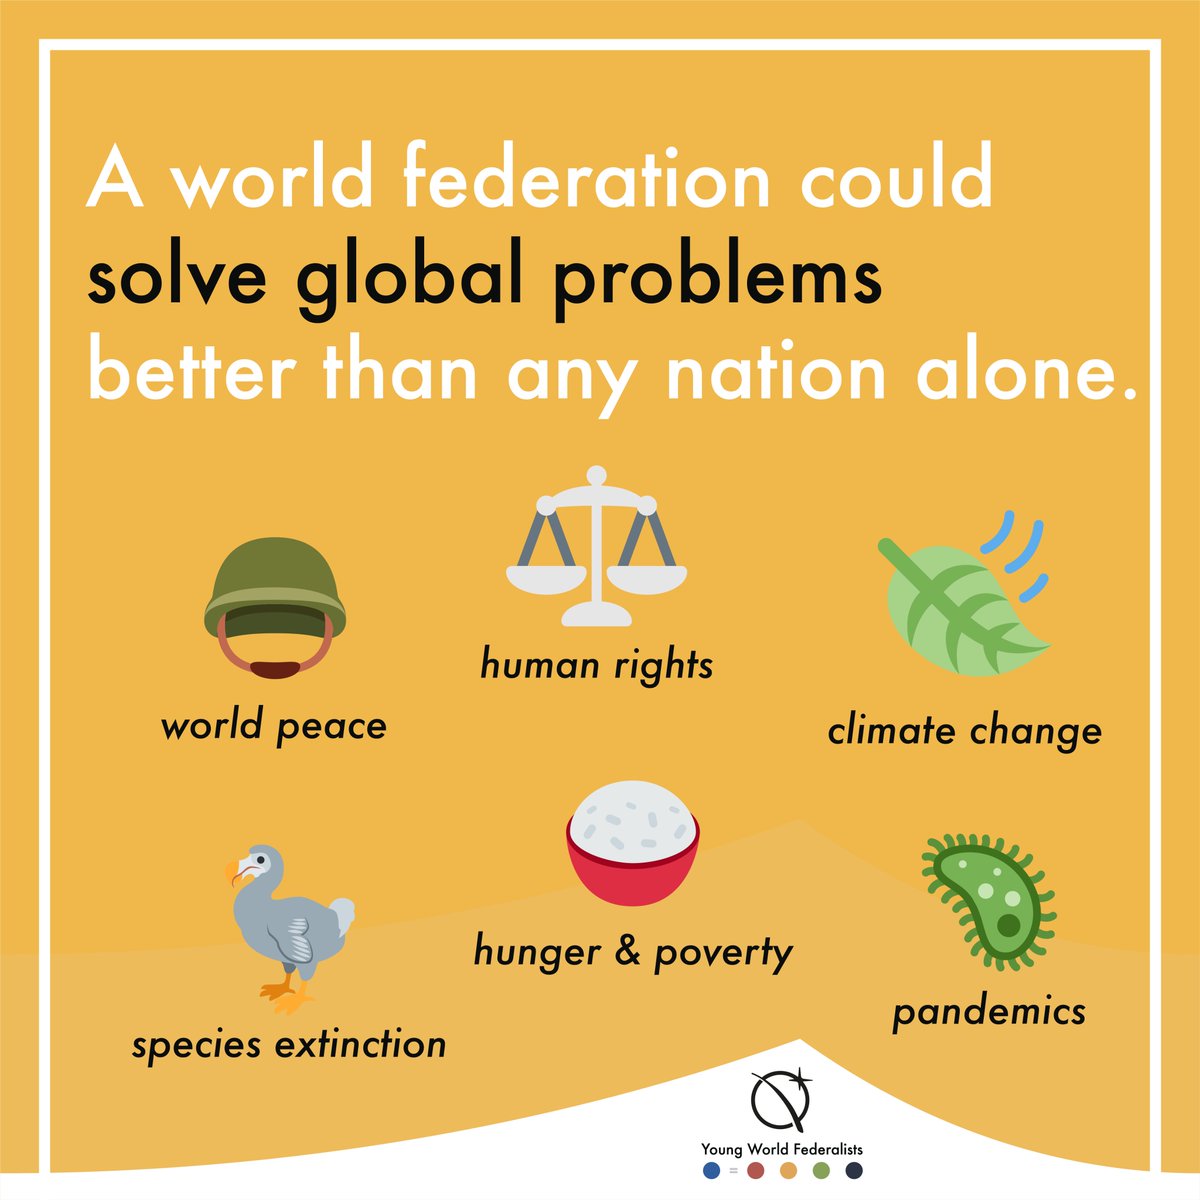 A world federation could solve #globalproblems better than any nation alone:
🪖#worldpeace, ⚖️#humanrights, 🍃#climatechange, 🦤#speciesextinction, 🍚#hunger & #poverty, 🦠#pandemics